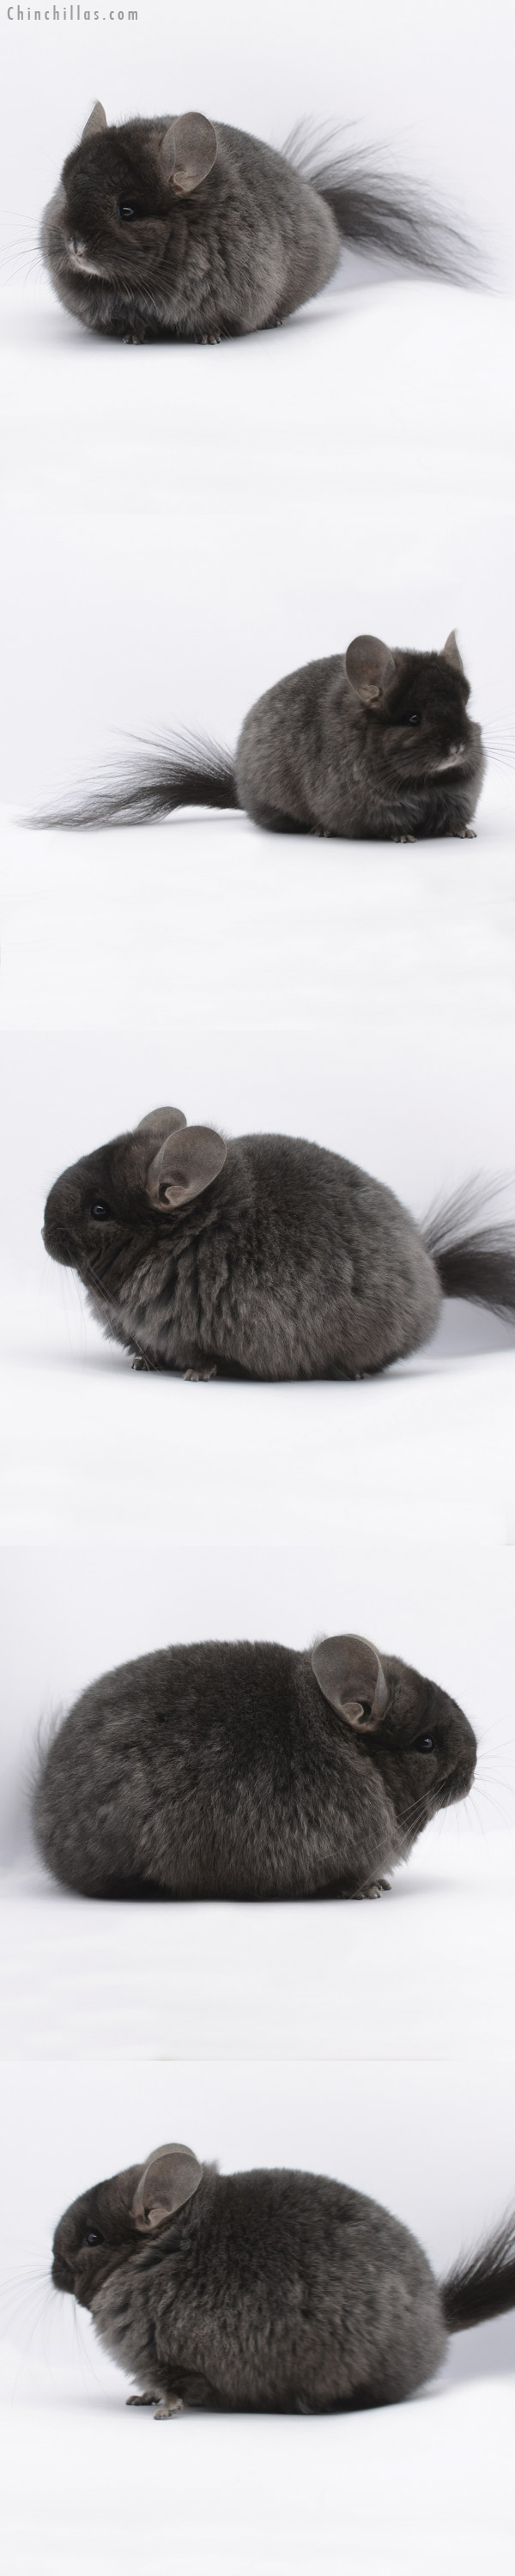 Chinchilla or related item offered for sale or export on Chinchillas.com - 20279 Brevi Type Ebony ( Locken Carrier )  Royal Persian Angora Female Chinchilla